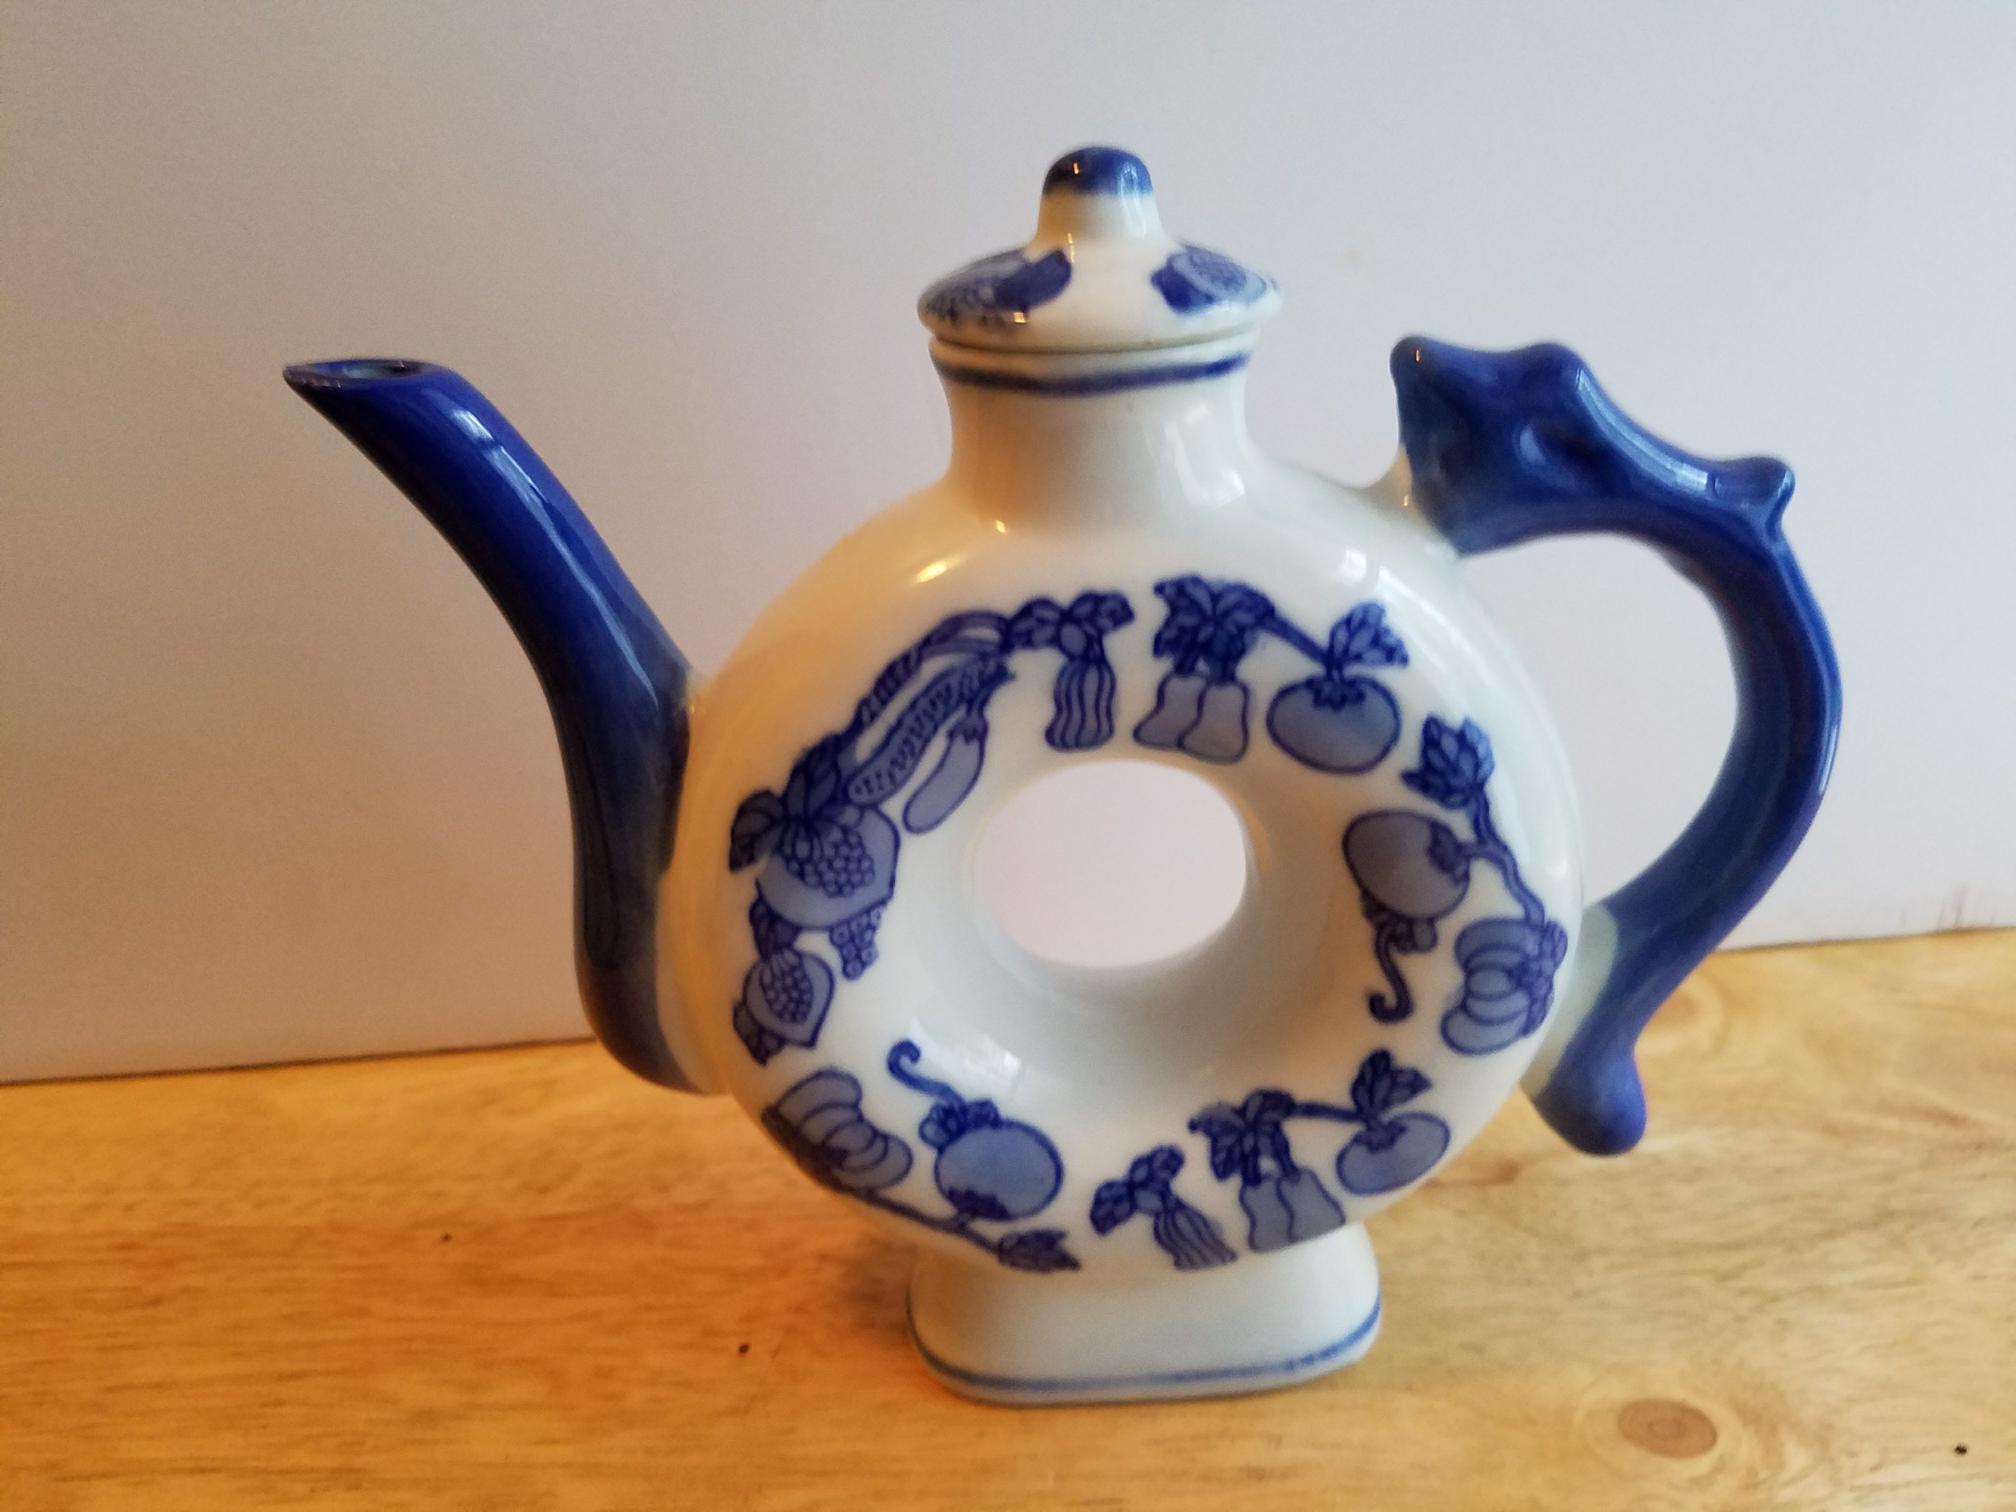 Blue and White Tea Pot Set Donut Porcelain Tea Pots With Lids, Blue and  White Chinoiserie Chinese Geometric and Floral Patterns 